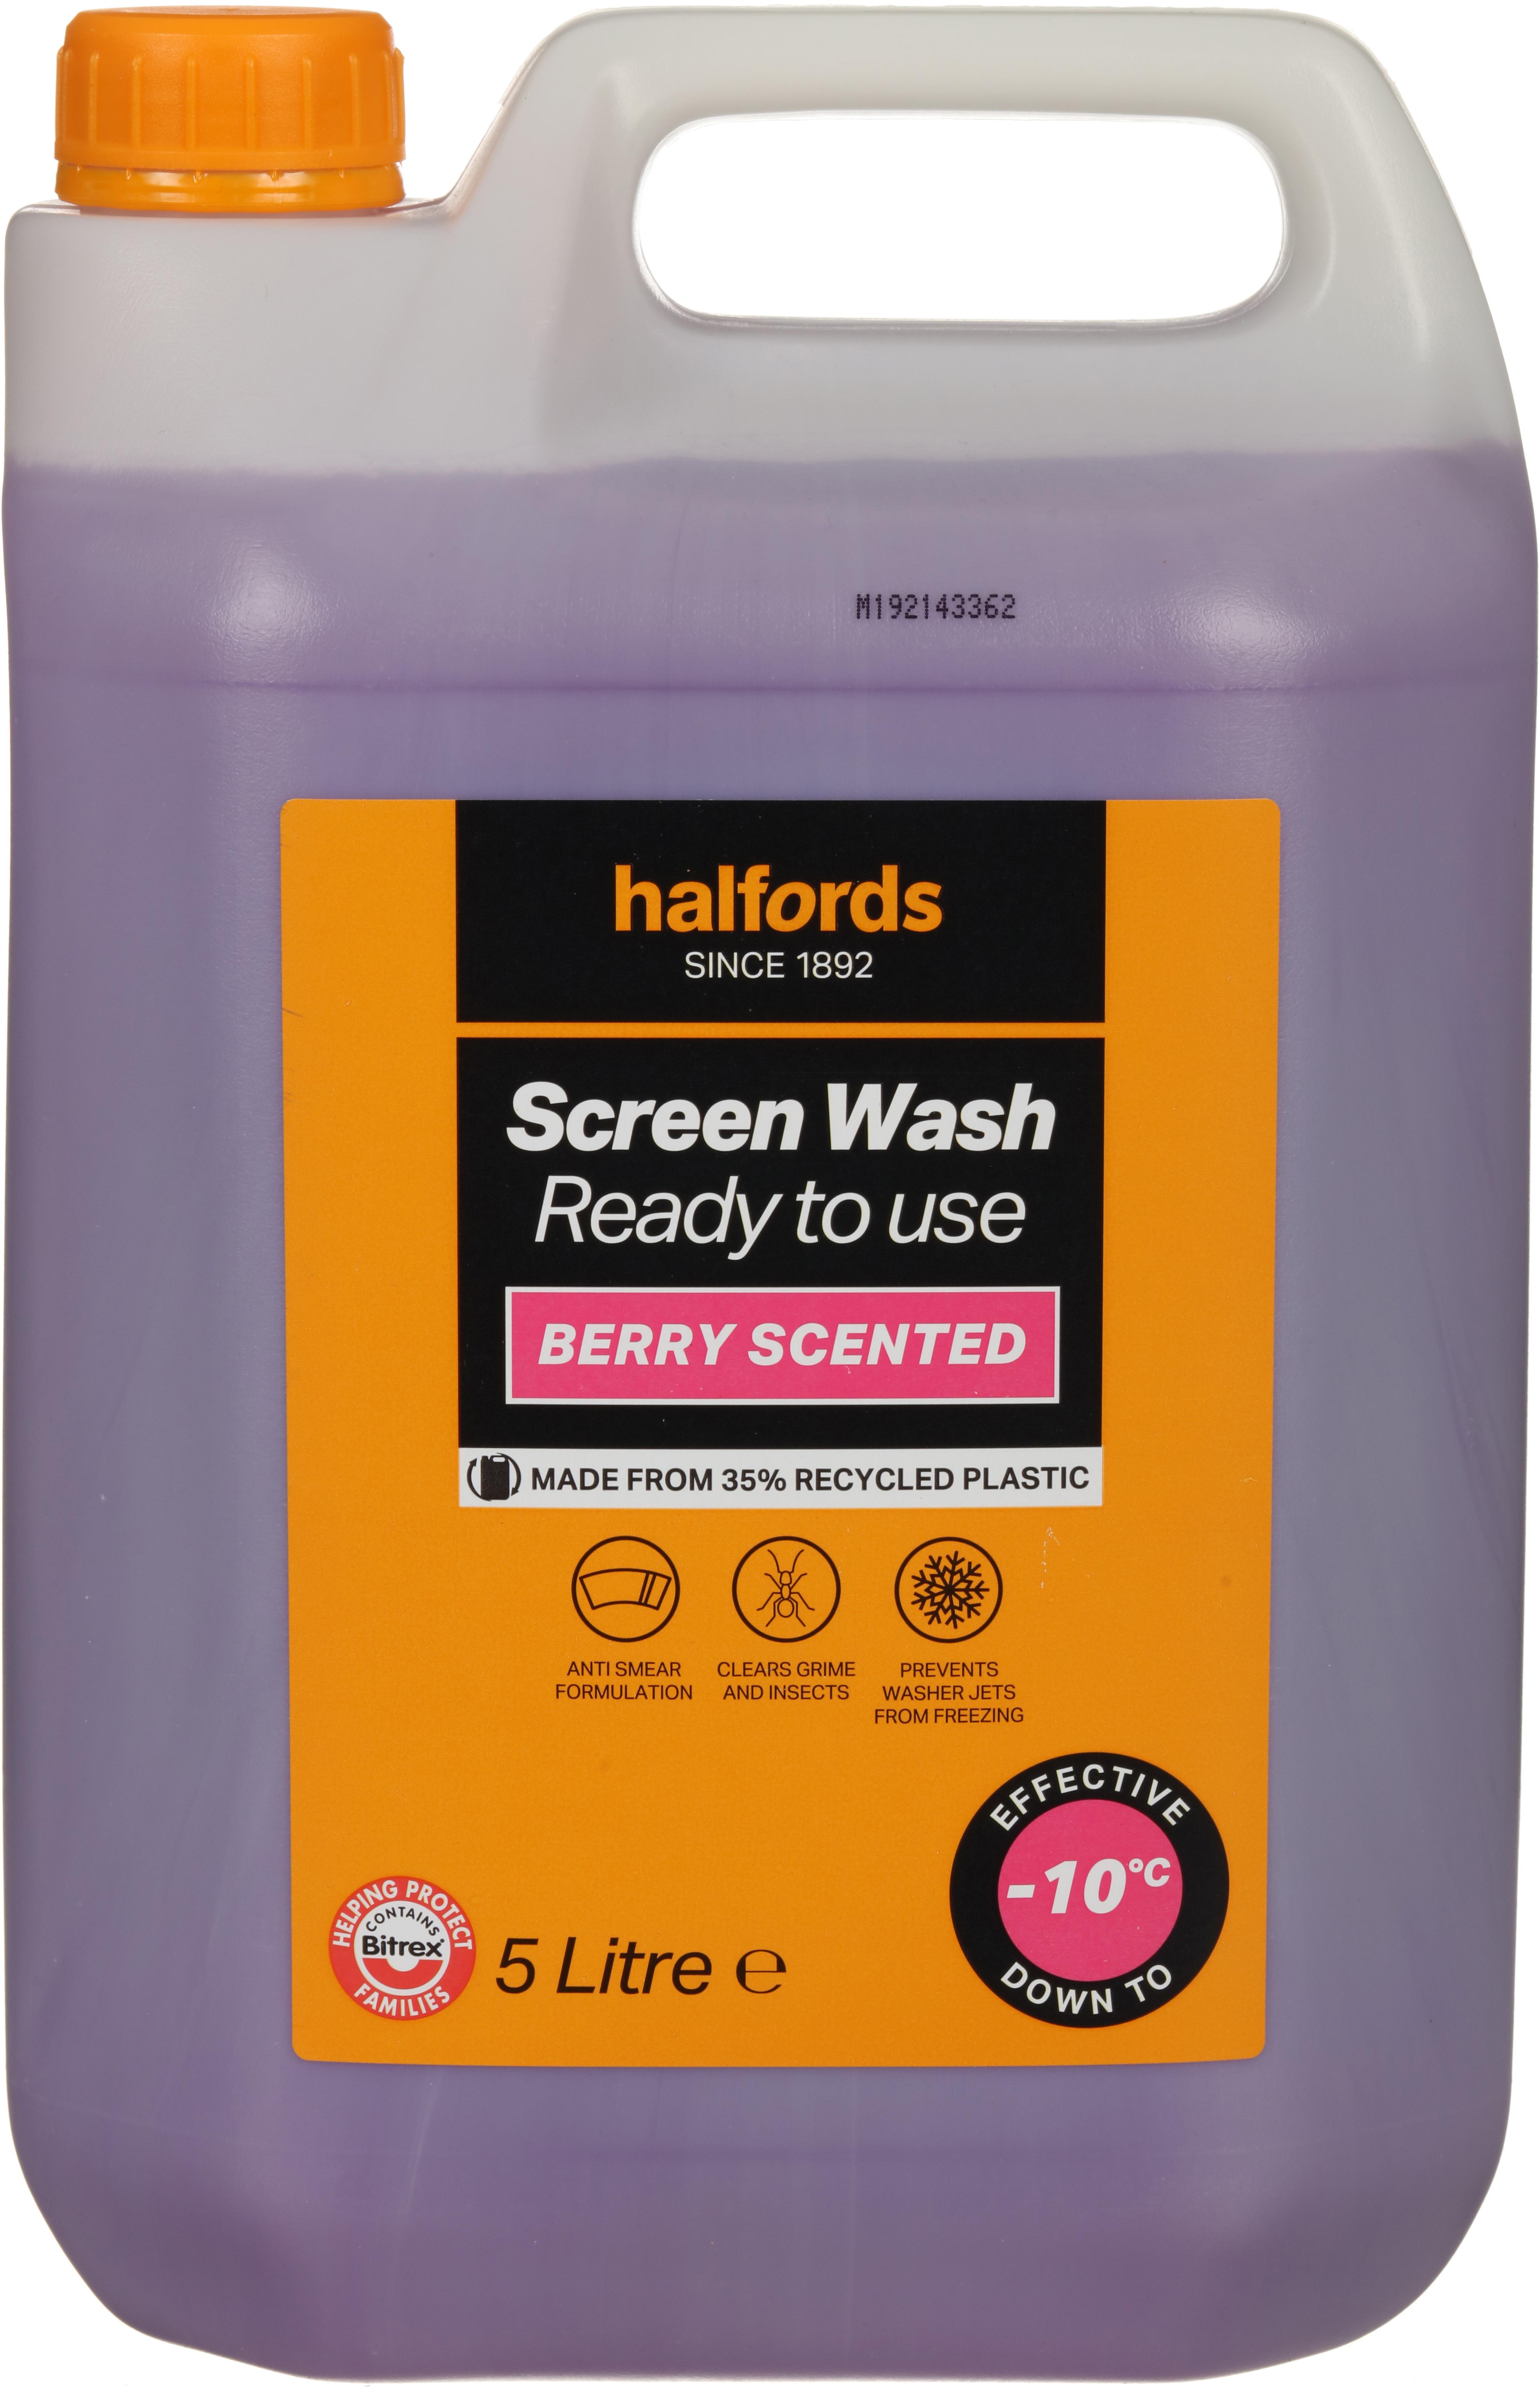 Halfords -10 Ready Mixed Screenwash 5L - Berry